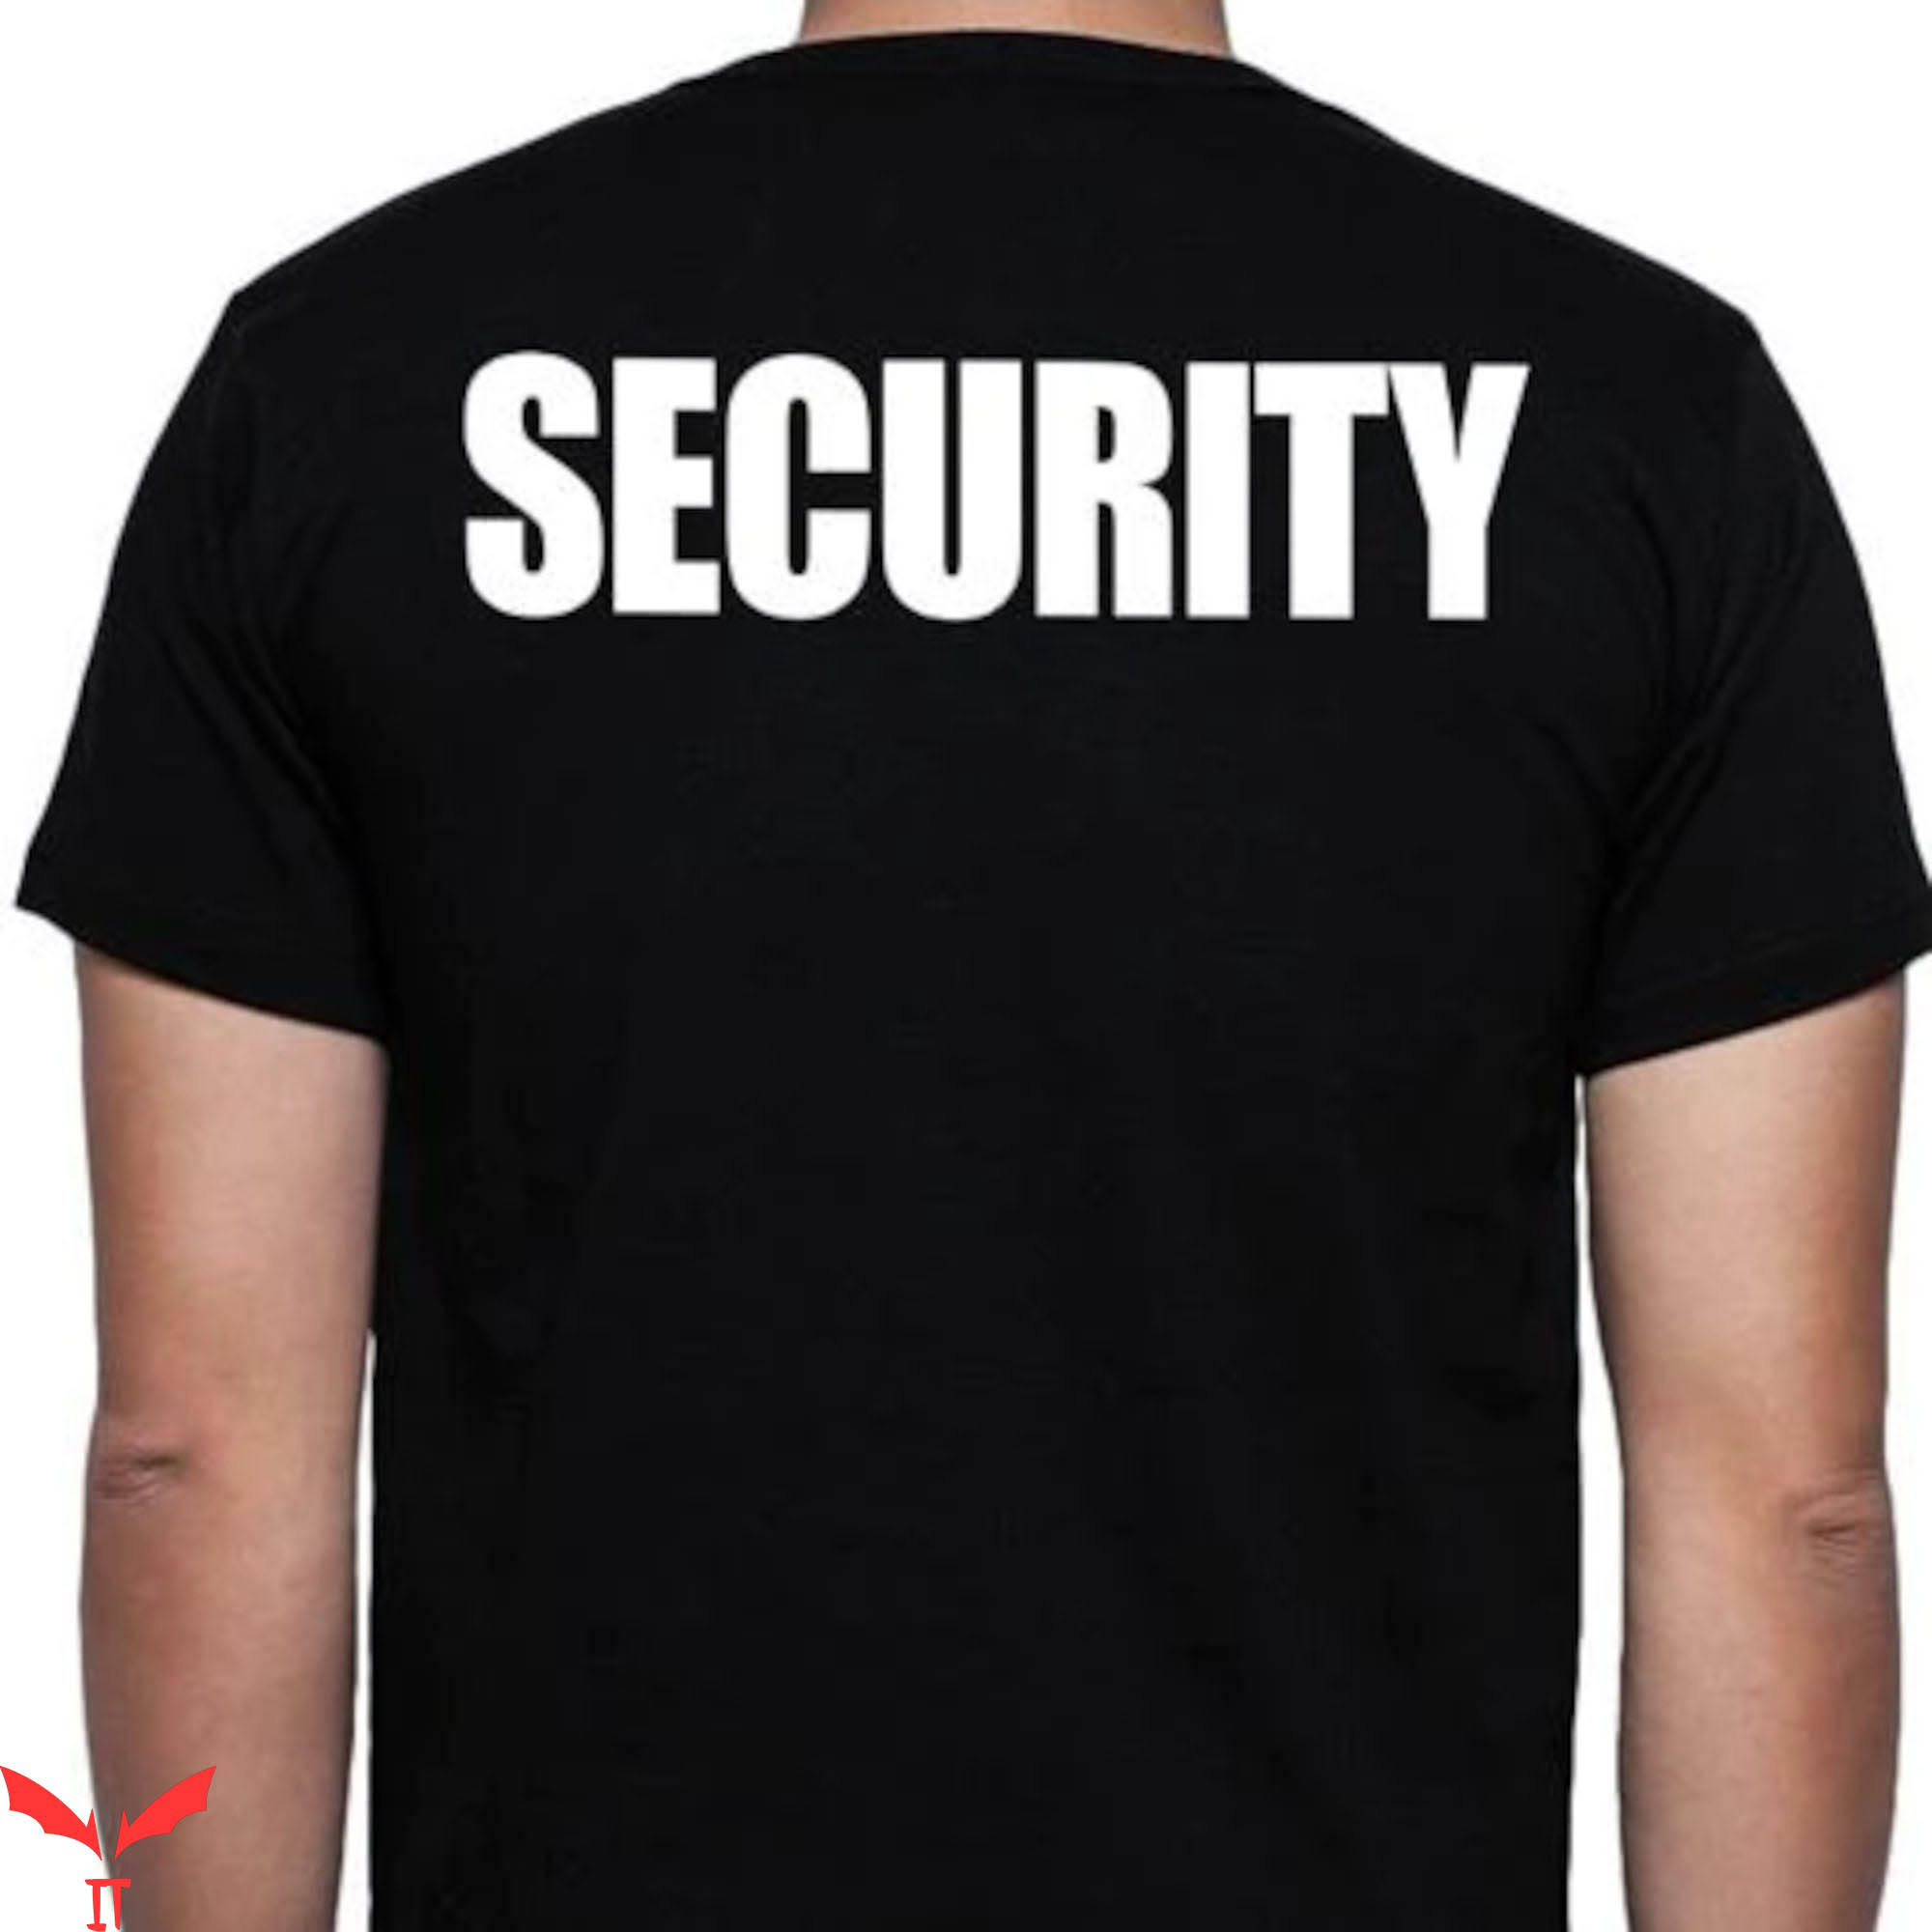 Security T-Shirt Security Bodyguard Trendy Funny Tee